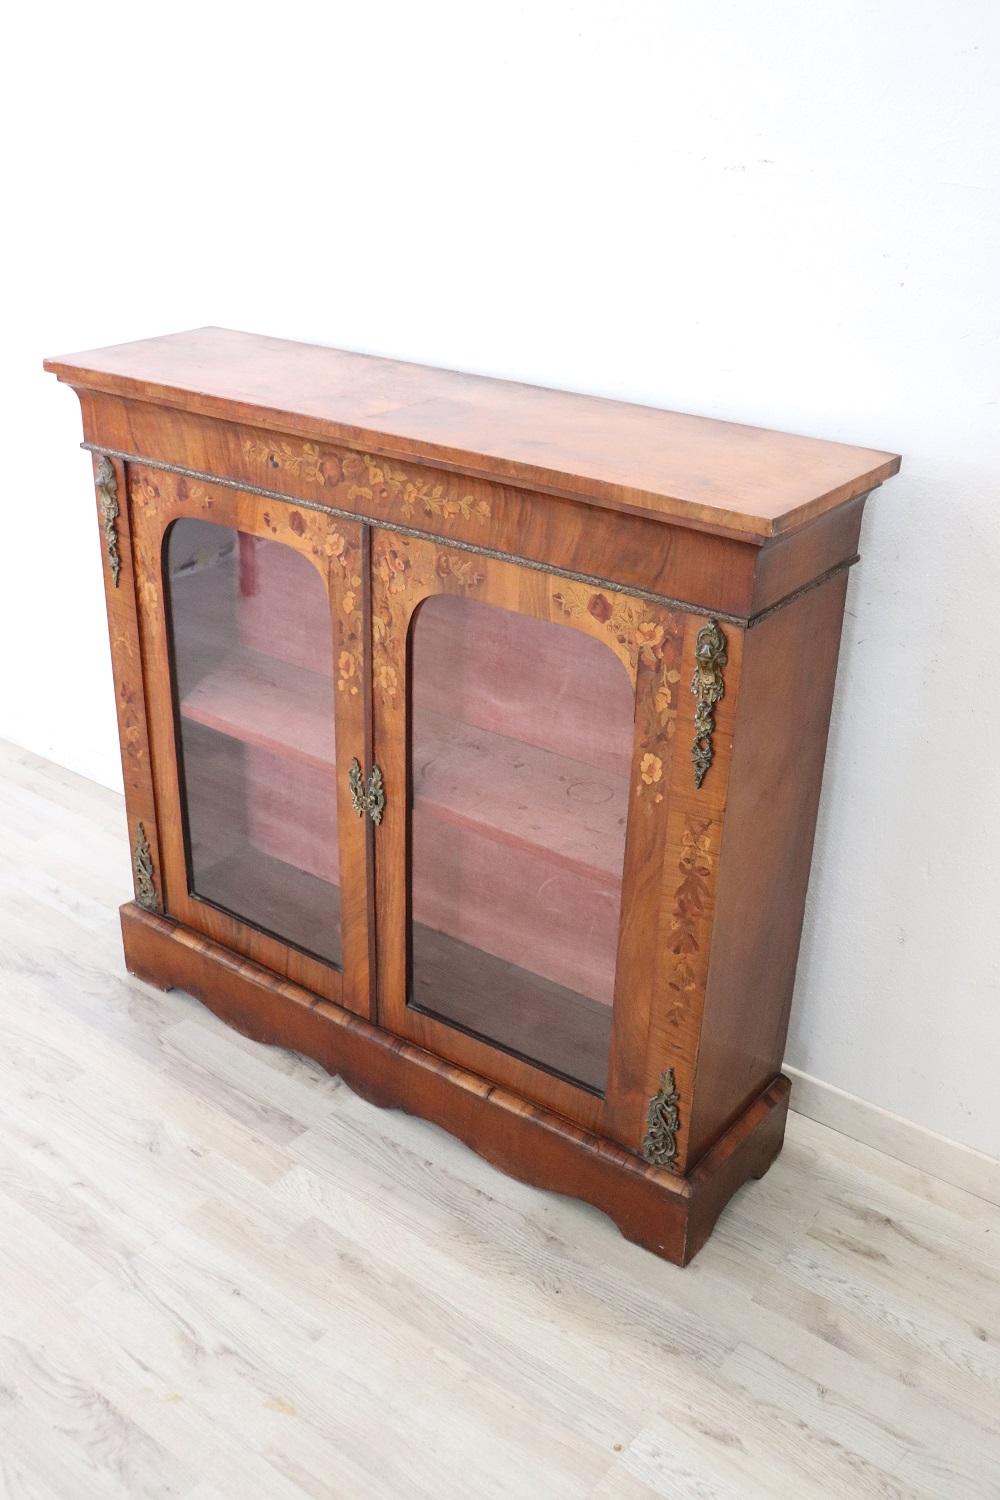 Elegant antique Napoleon III vitrine characterized by finely inlaid walnut. Enriched with precious finely chiseled golden bronzes that cover the vitrine in different parts. Internally lined with precious velvet that shows some signs of wear. Perfect